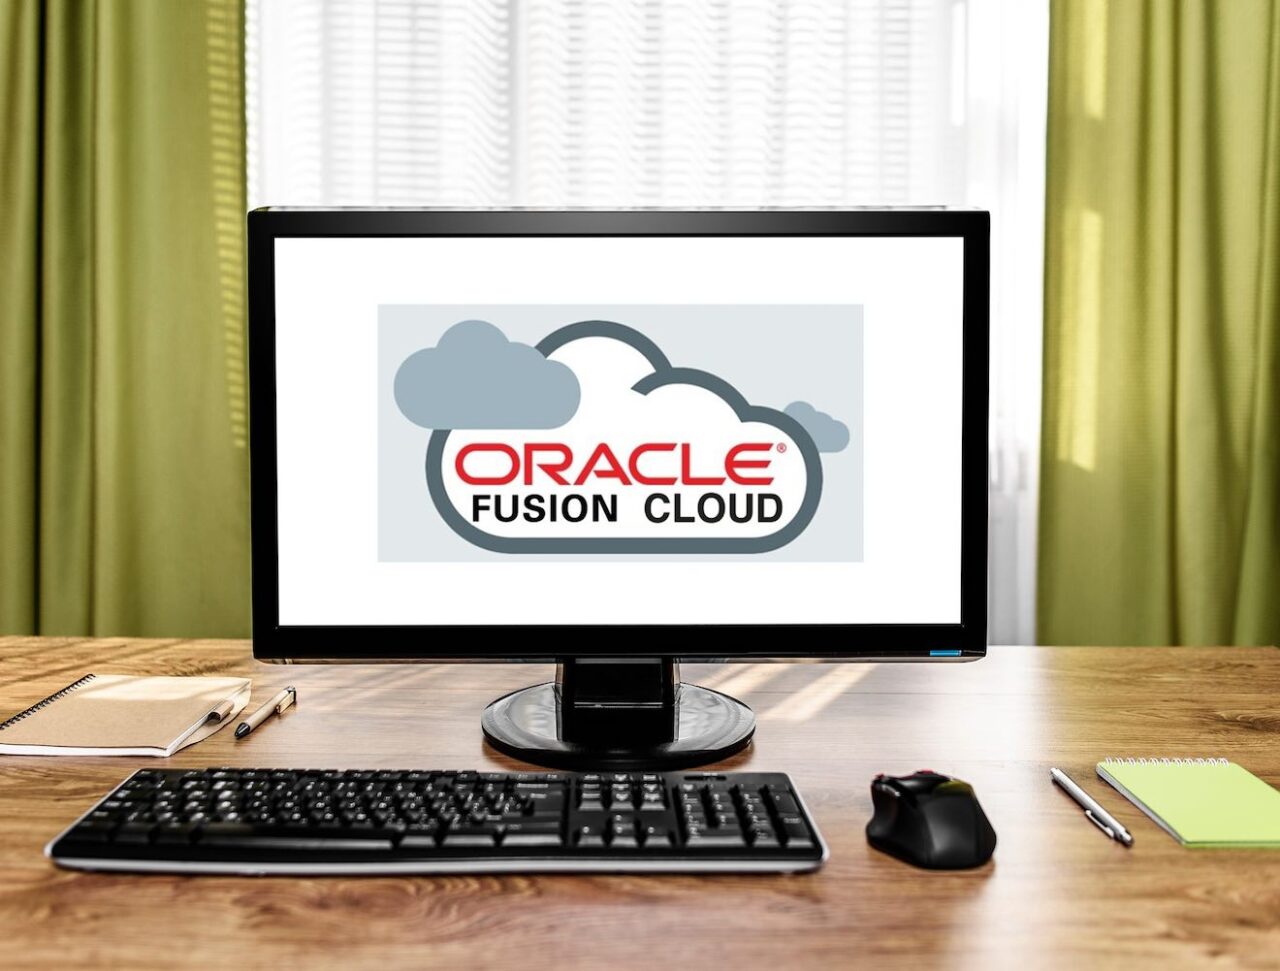 Oracle Fusion Cloud logo on computer screen